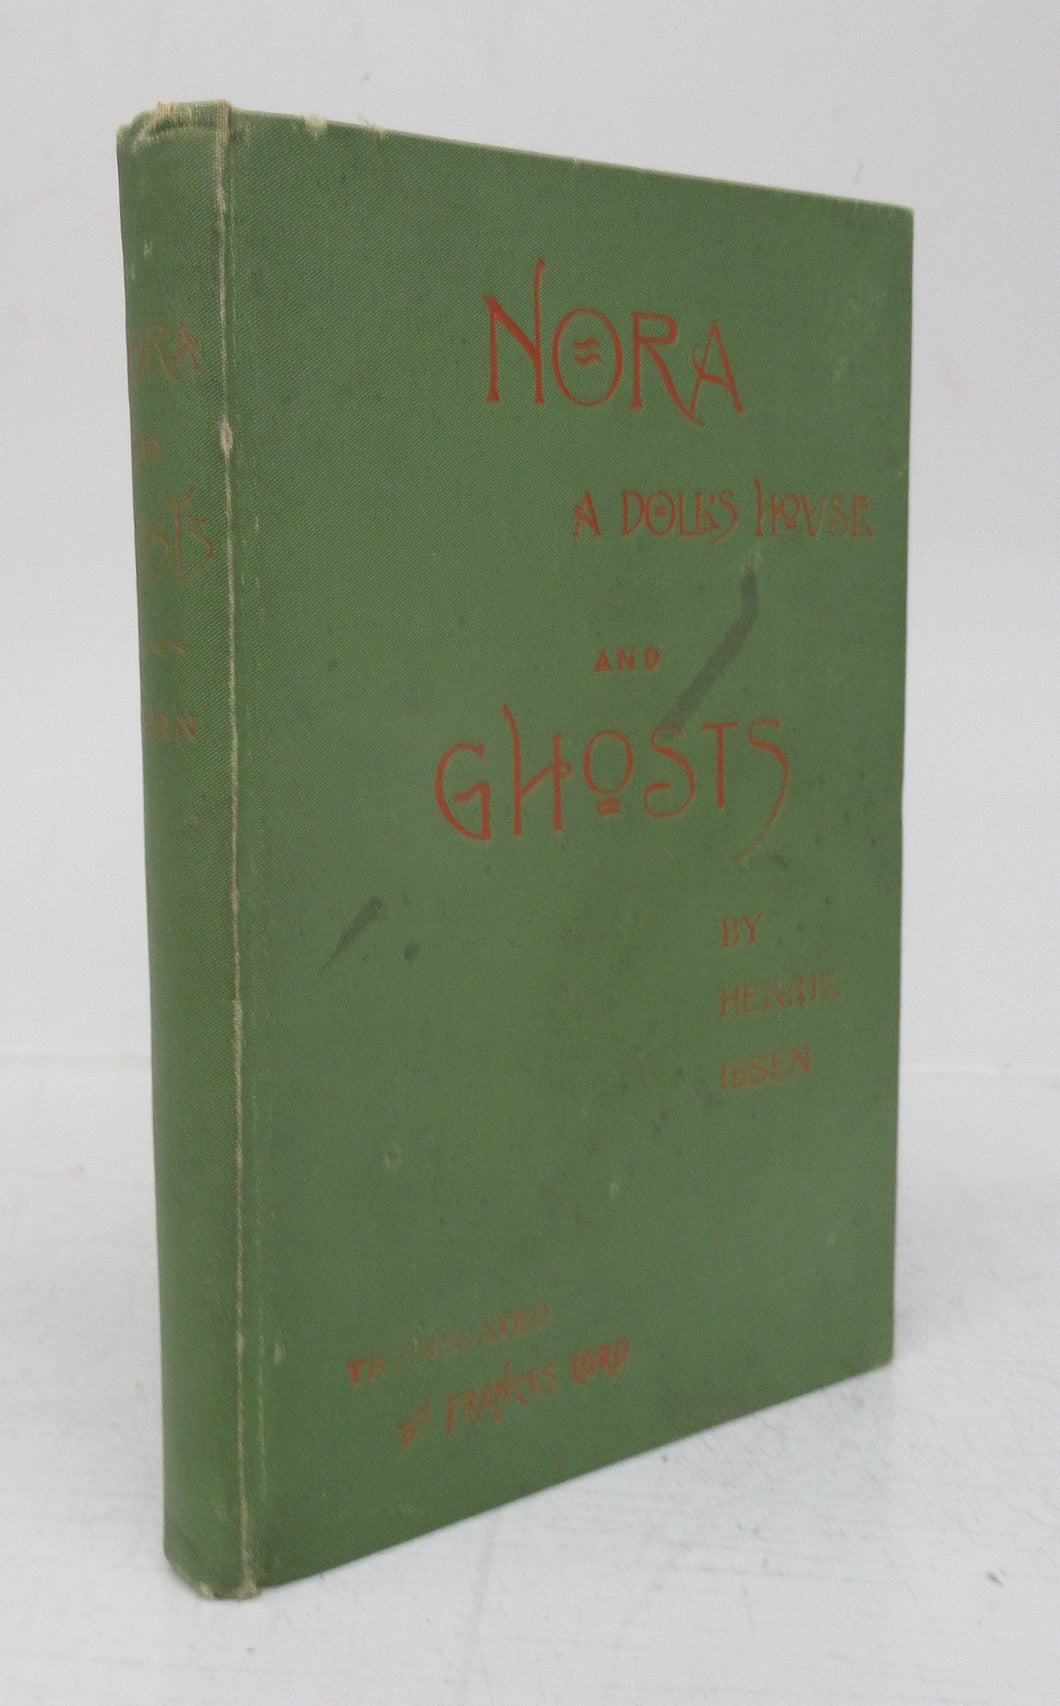 Nora: Or, A Doll's House. (Et Dukkehjem); Ghosts. A Drama of Family Life in Three Acts